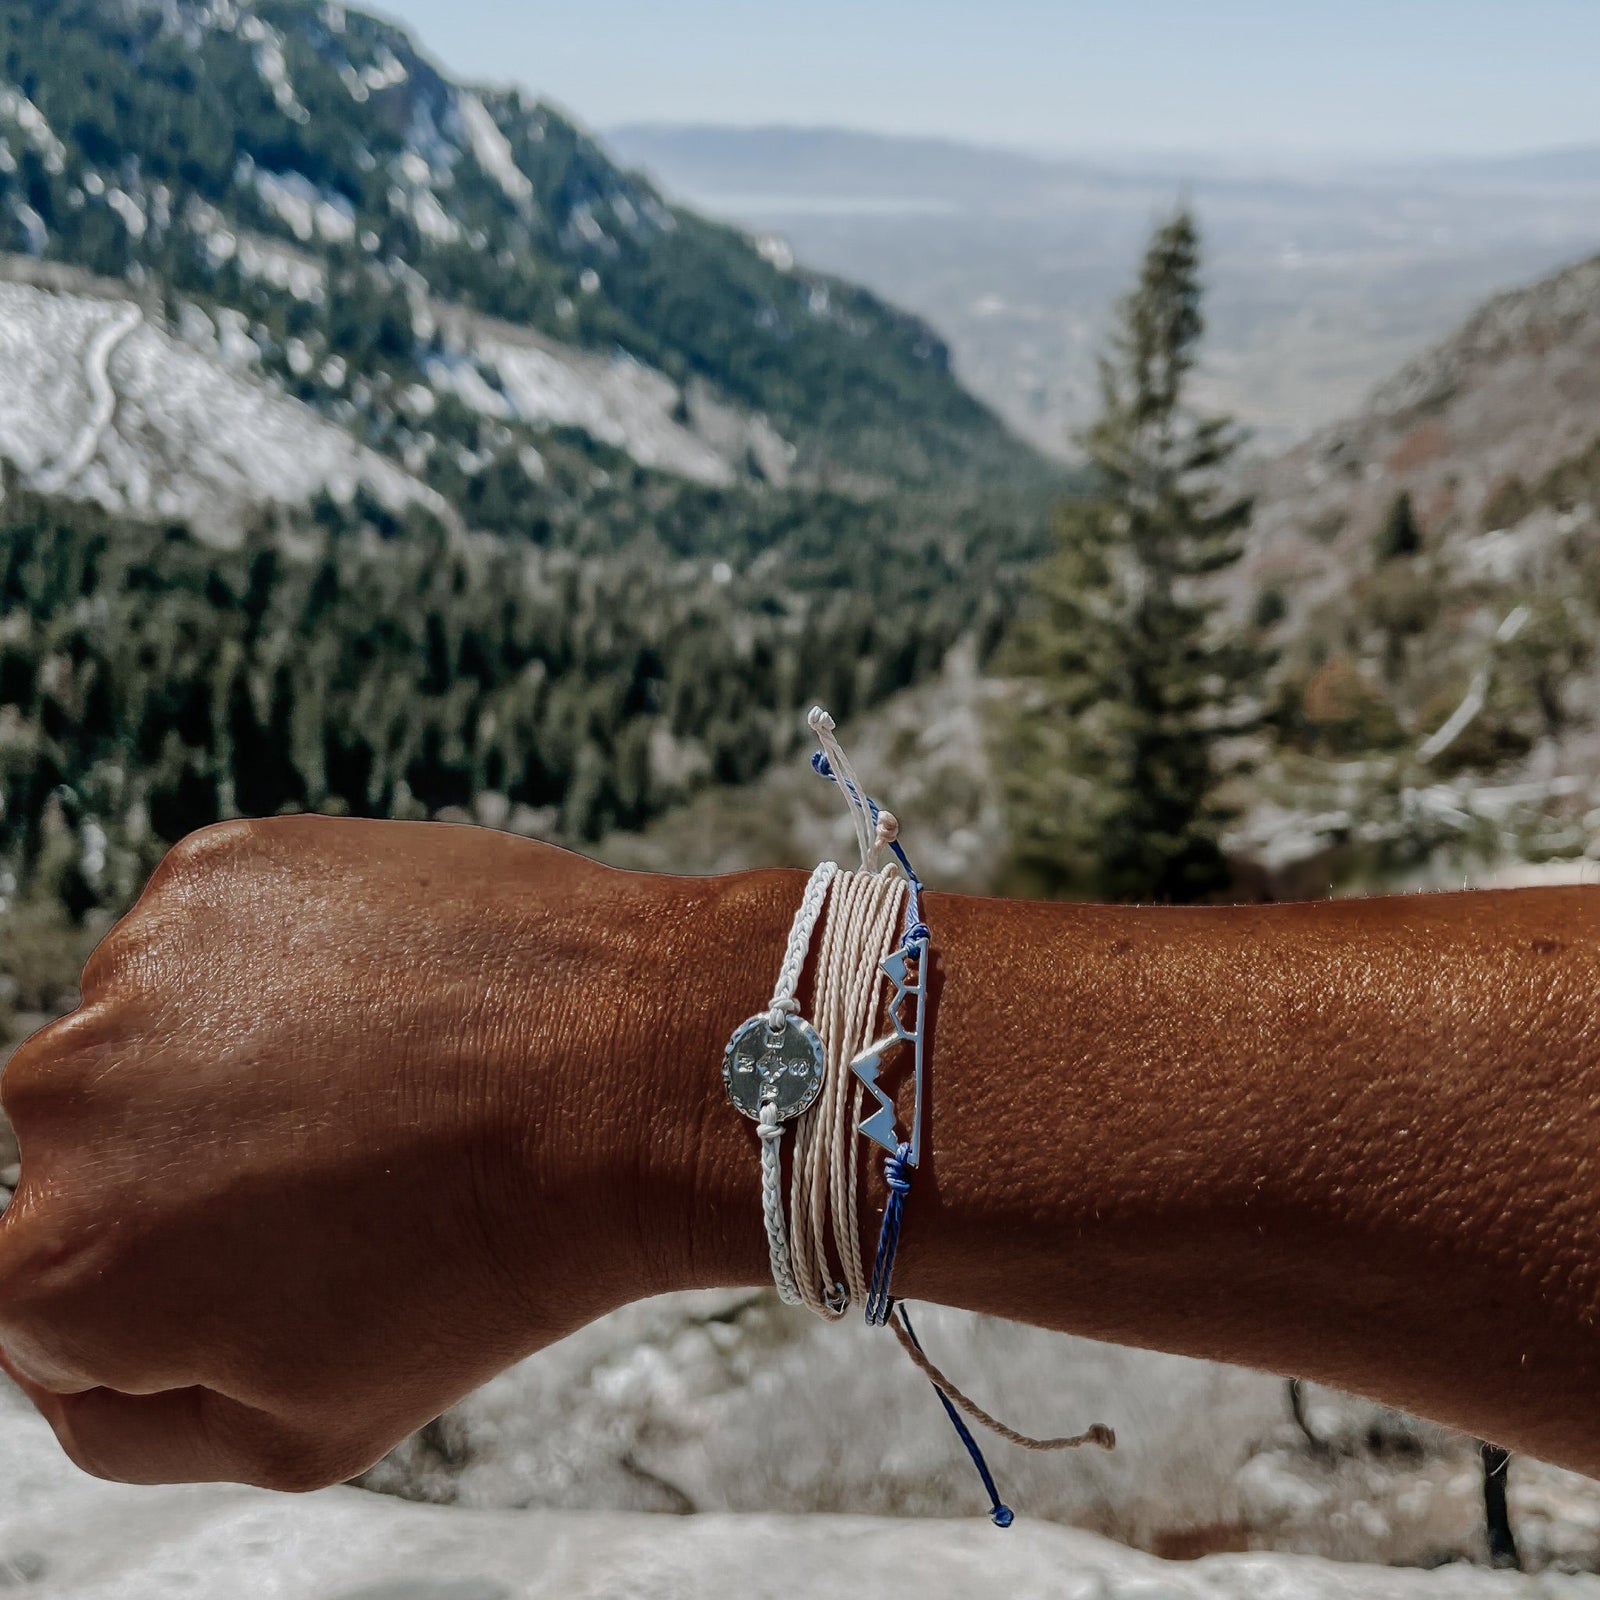 Wanderer Bracelets - Today is Free Shipping Day! Order today to get your  bracelets in time for the holiday and get free shipping on all US orders :)  https://wandererbracelets.com/ What story will